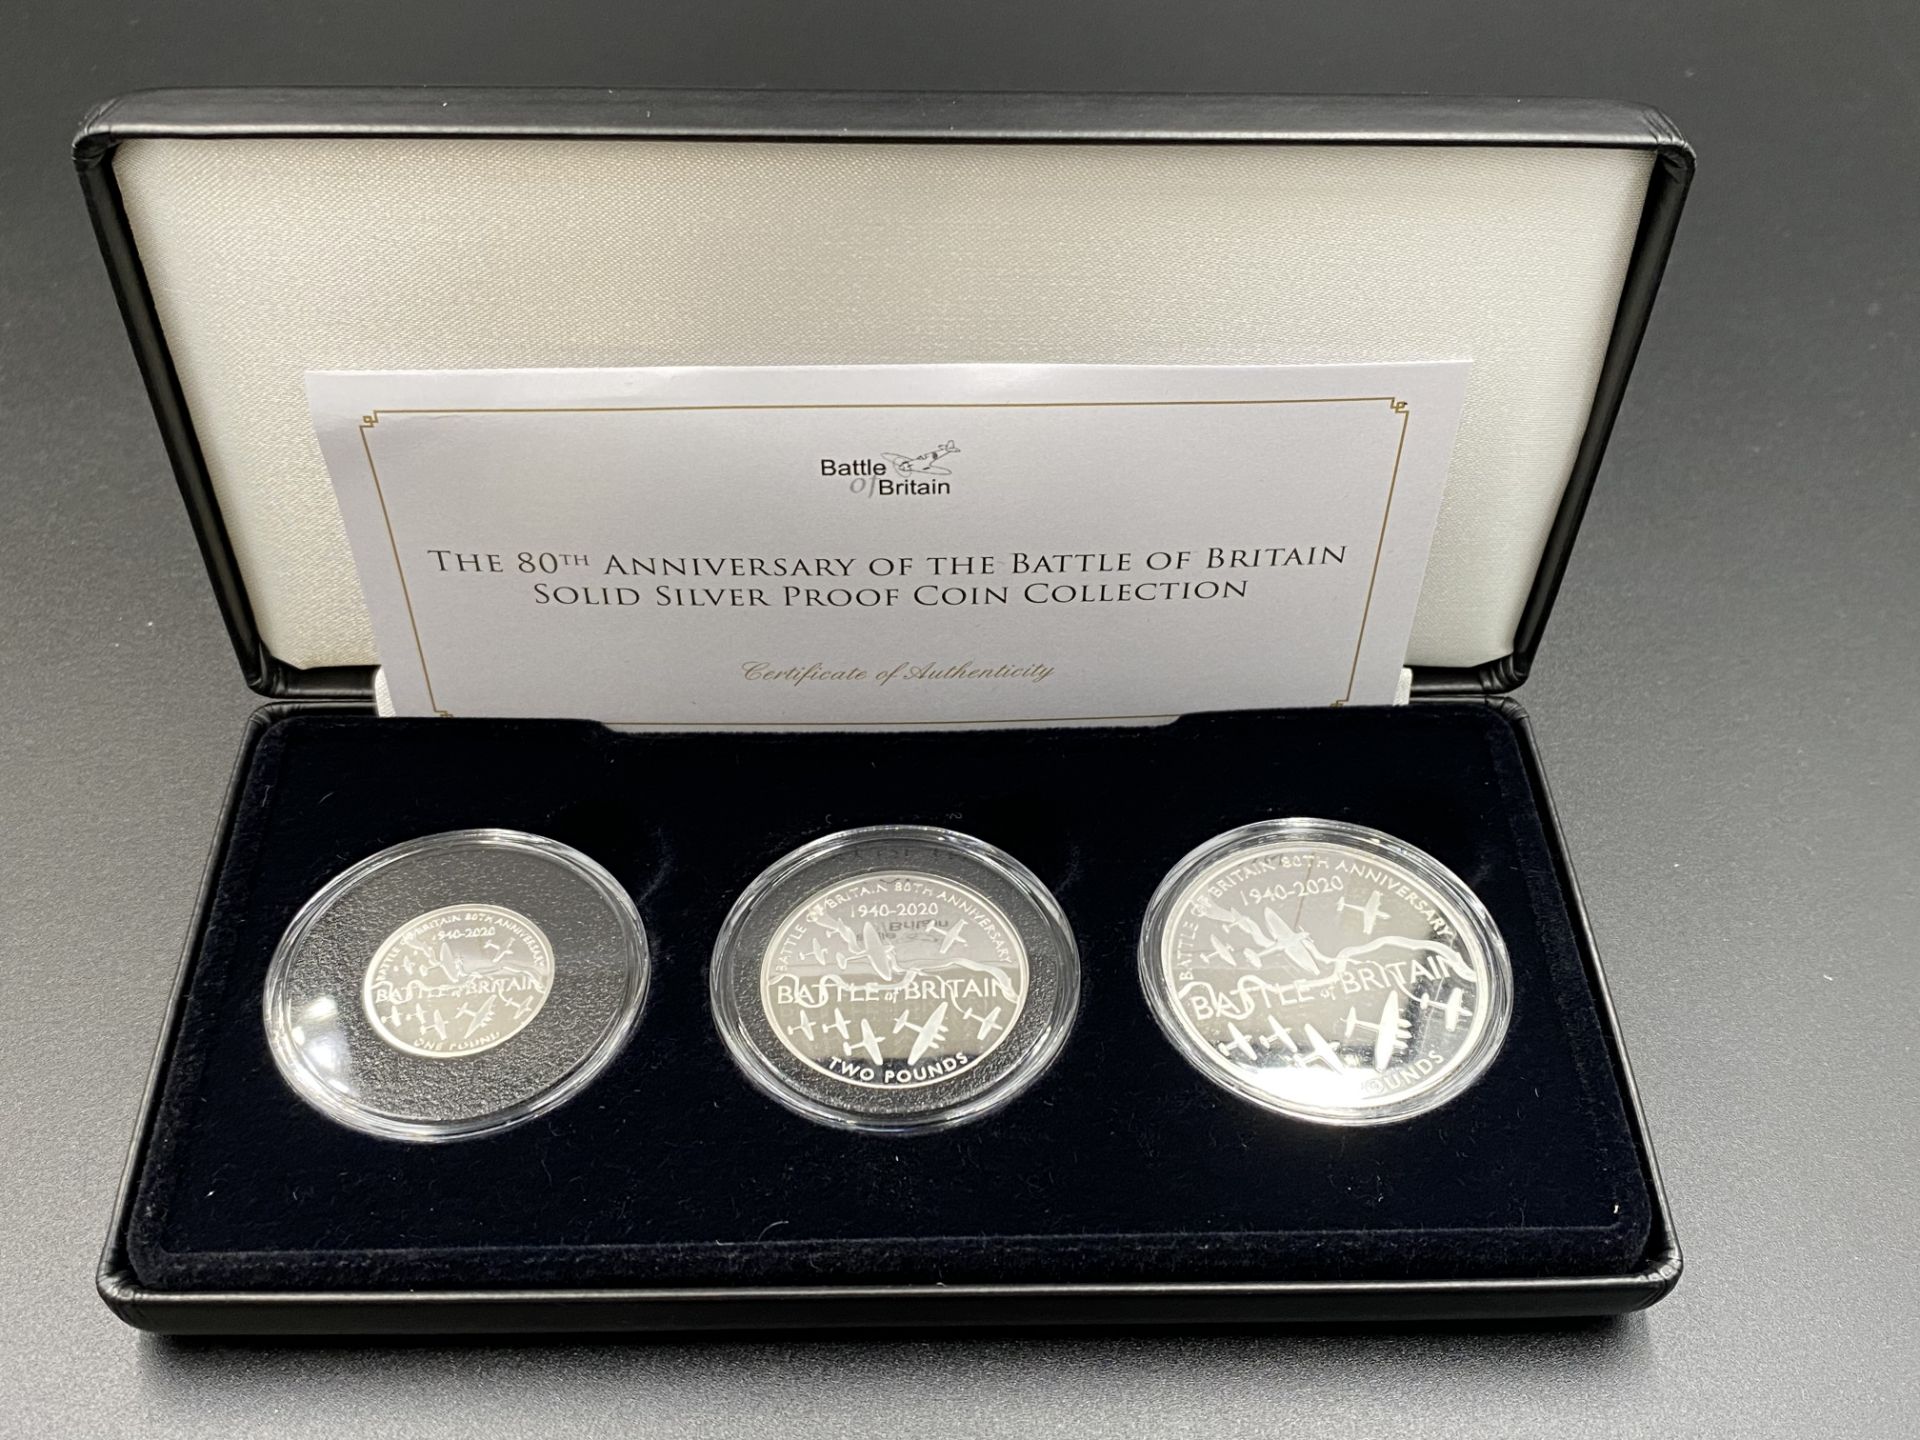 Jubilee Mint 80th Anniversary of the Battle of Britain silver proof coin collection